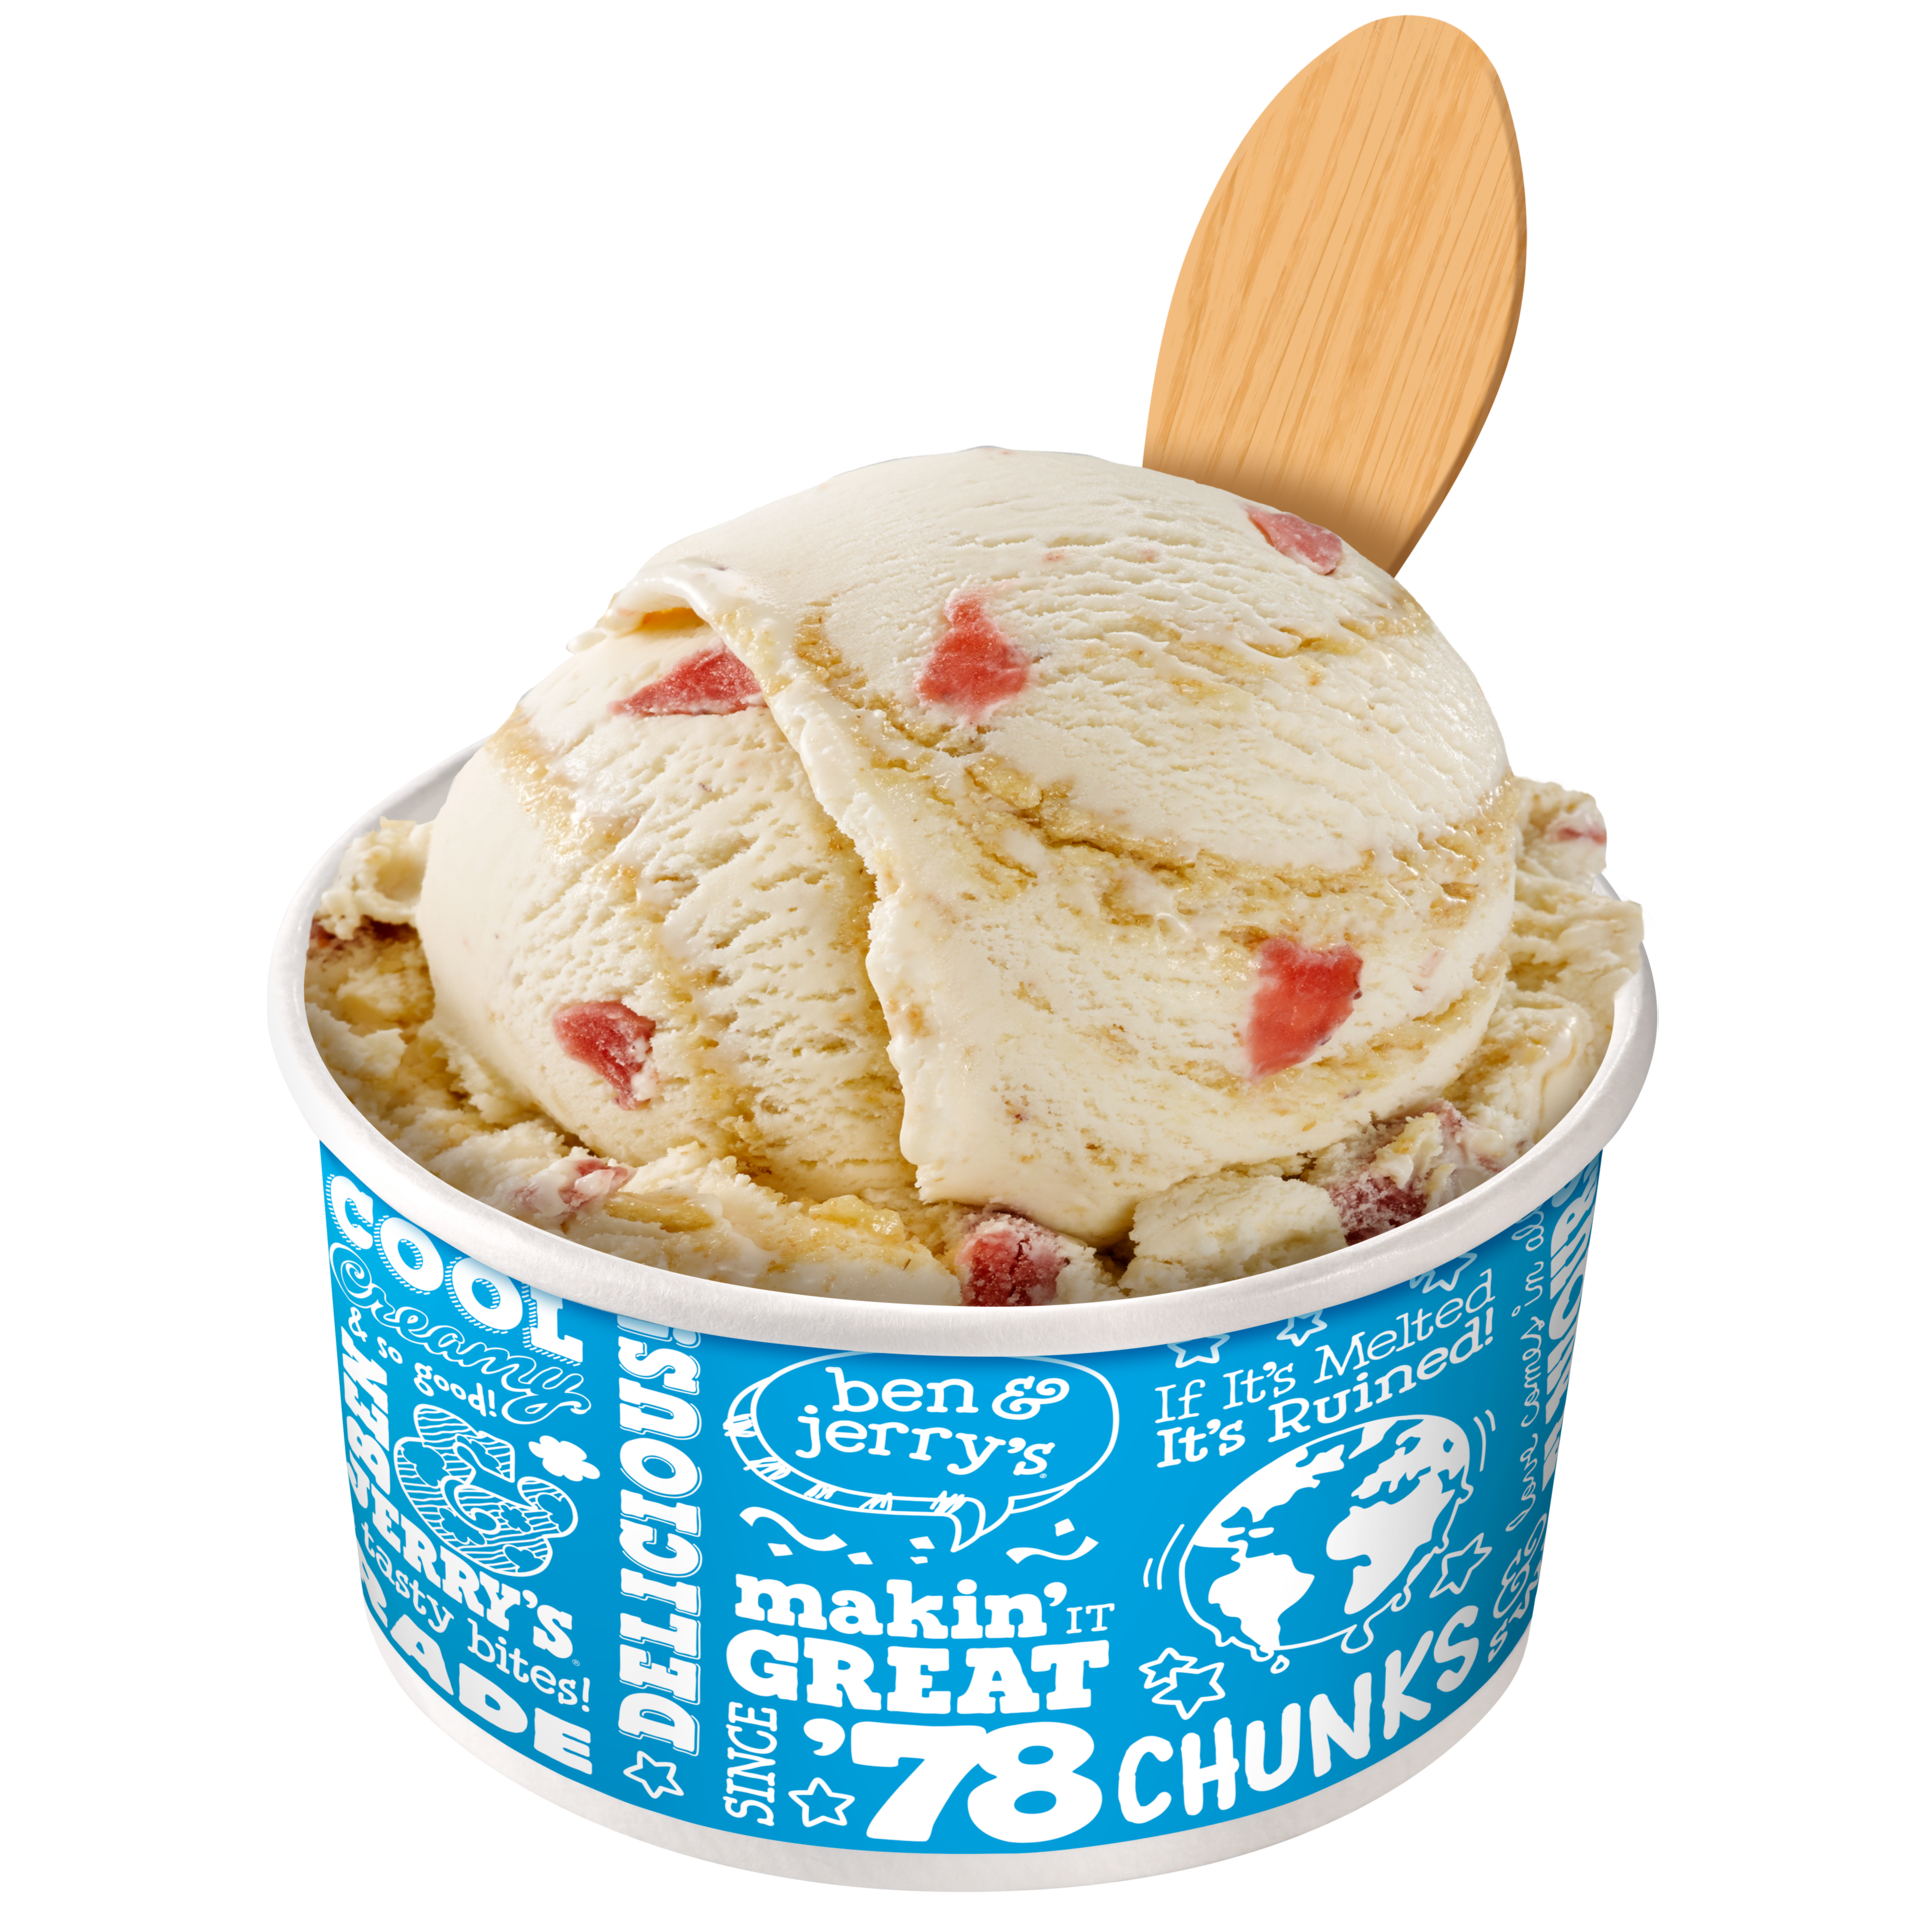 Strawberry Cheesecake Non-Dairy Oat in Scoop Shops